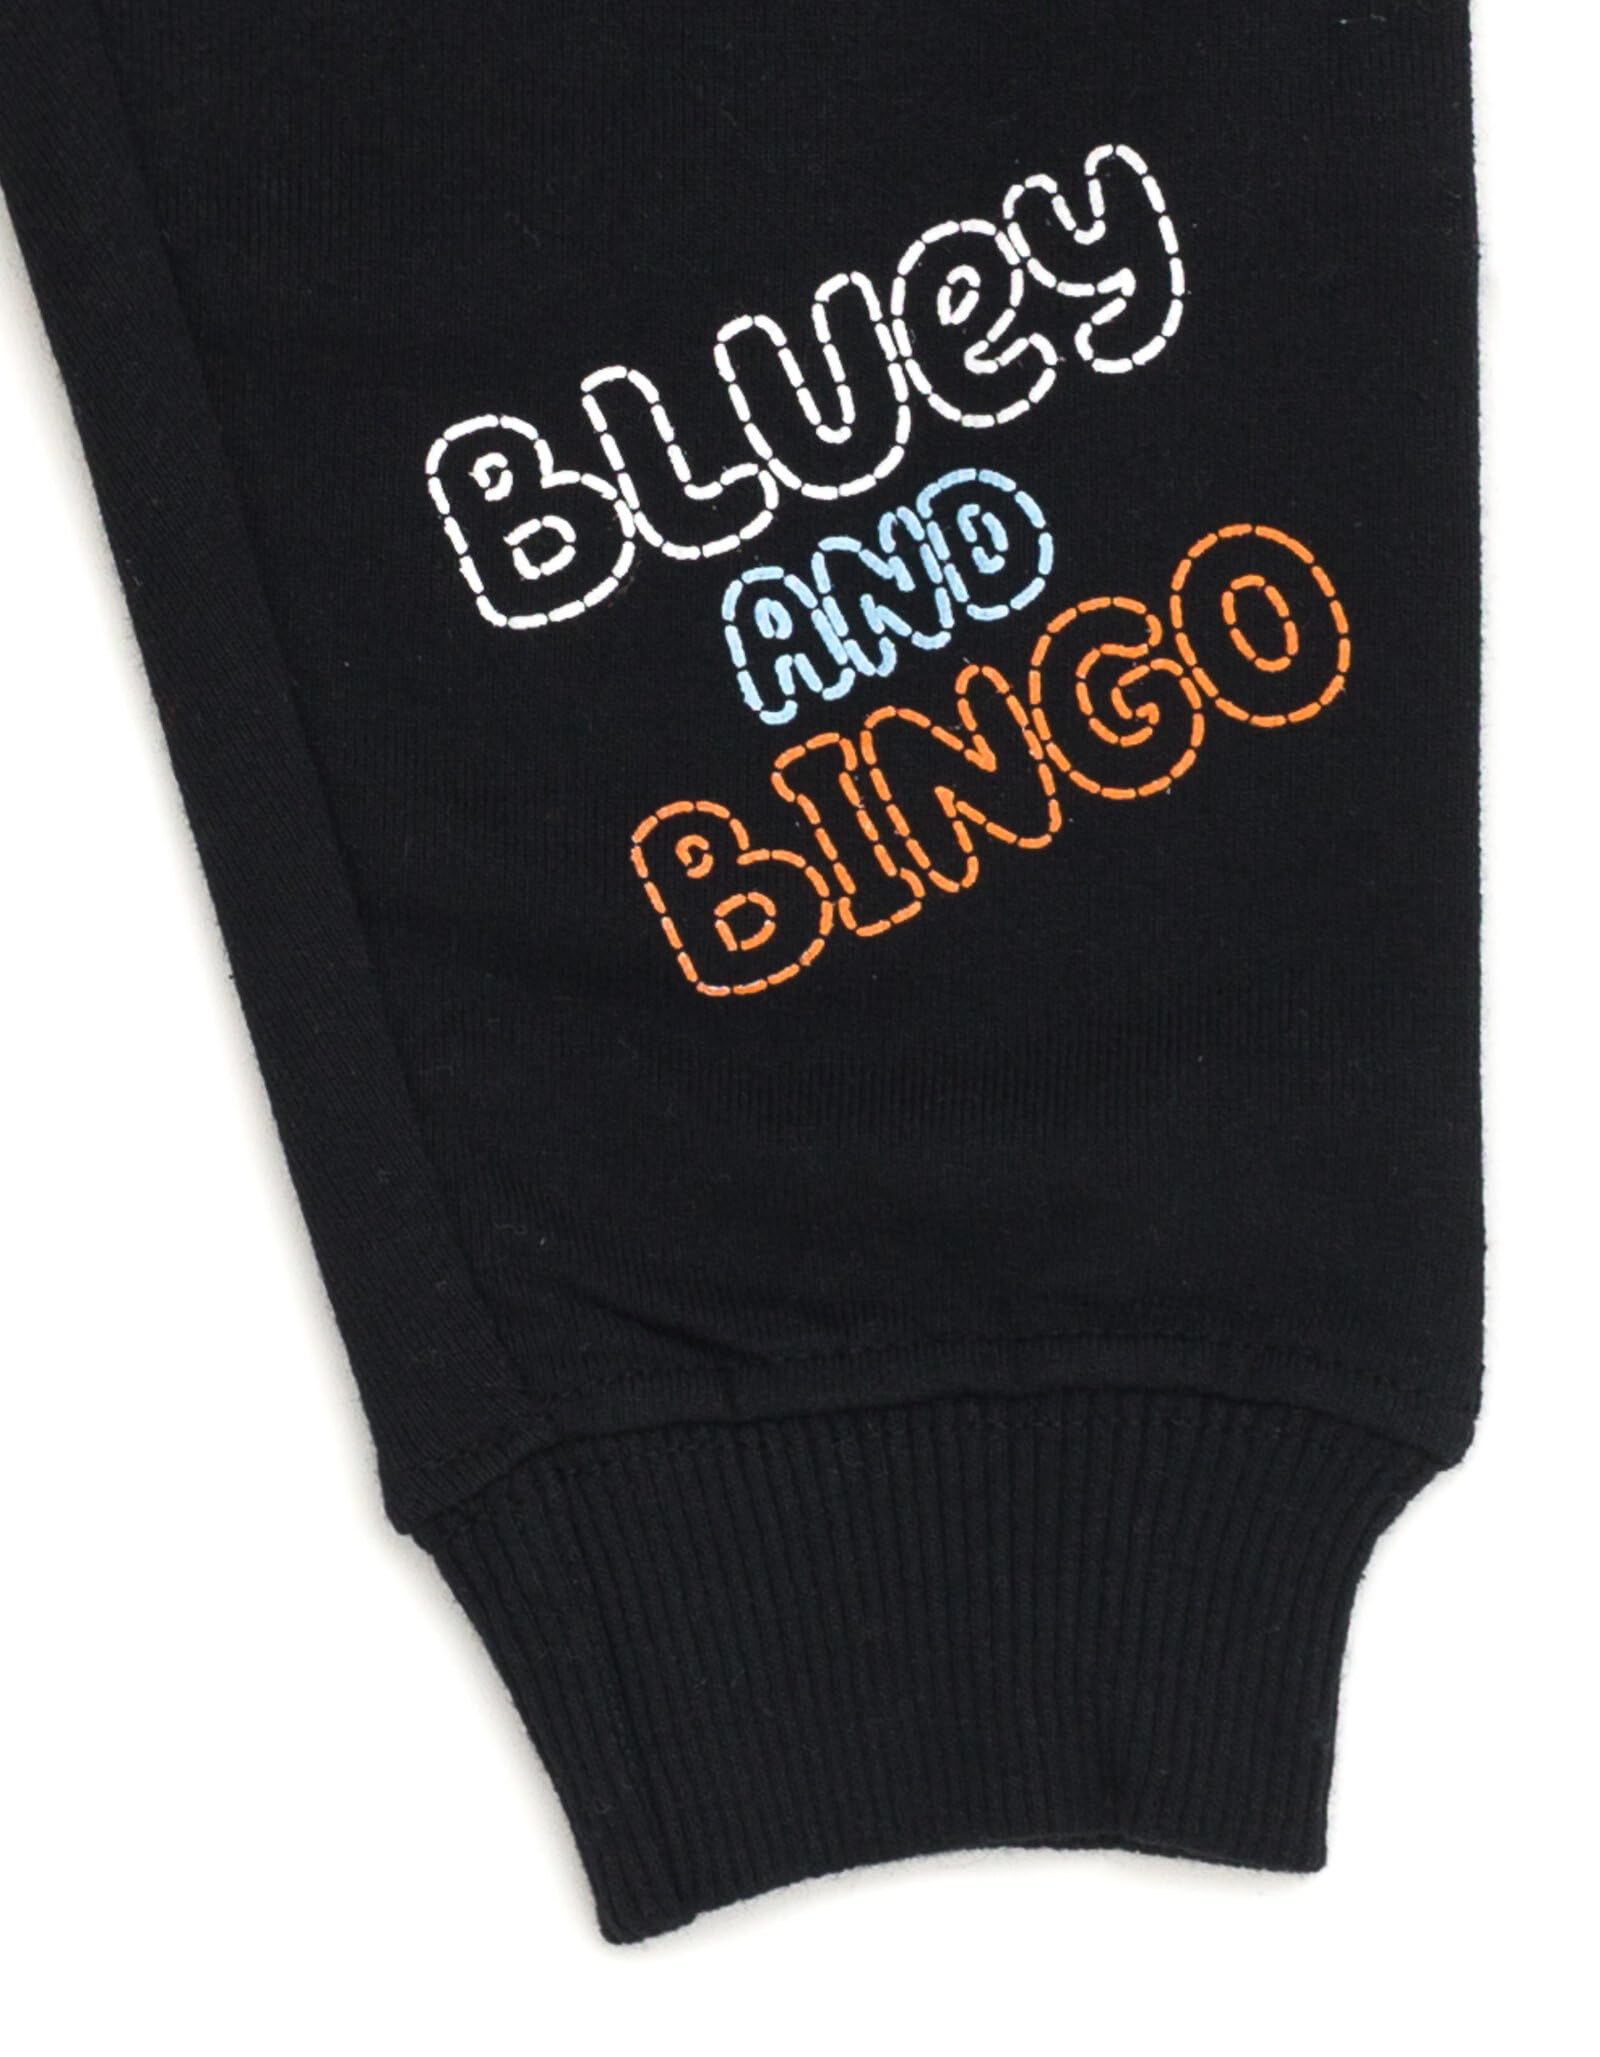 Bluey Bingo Henley T-Shirt and French Terry Pants Toddler to Little Kid